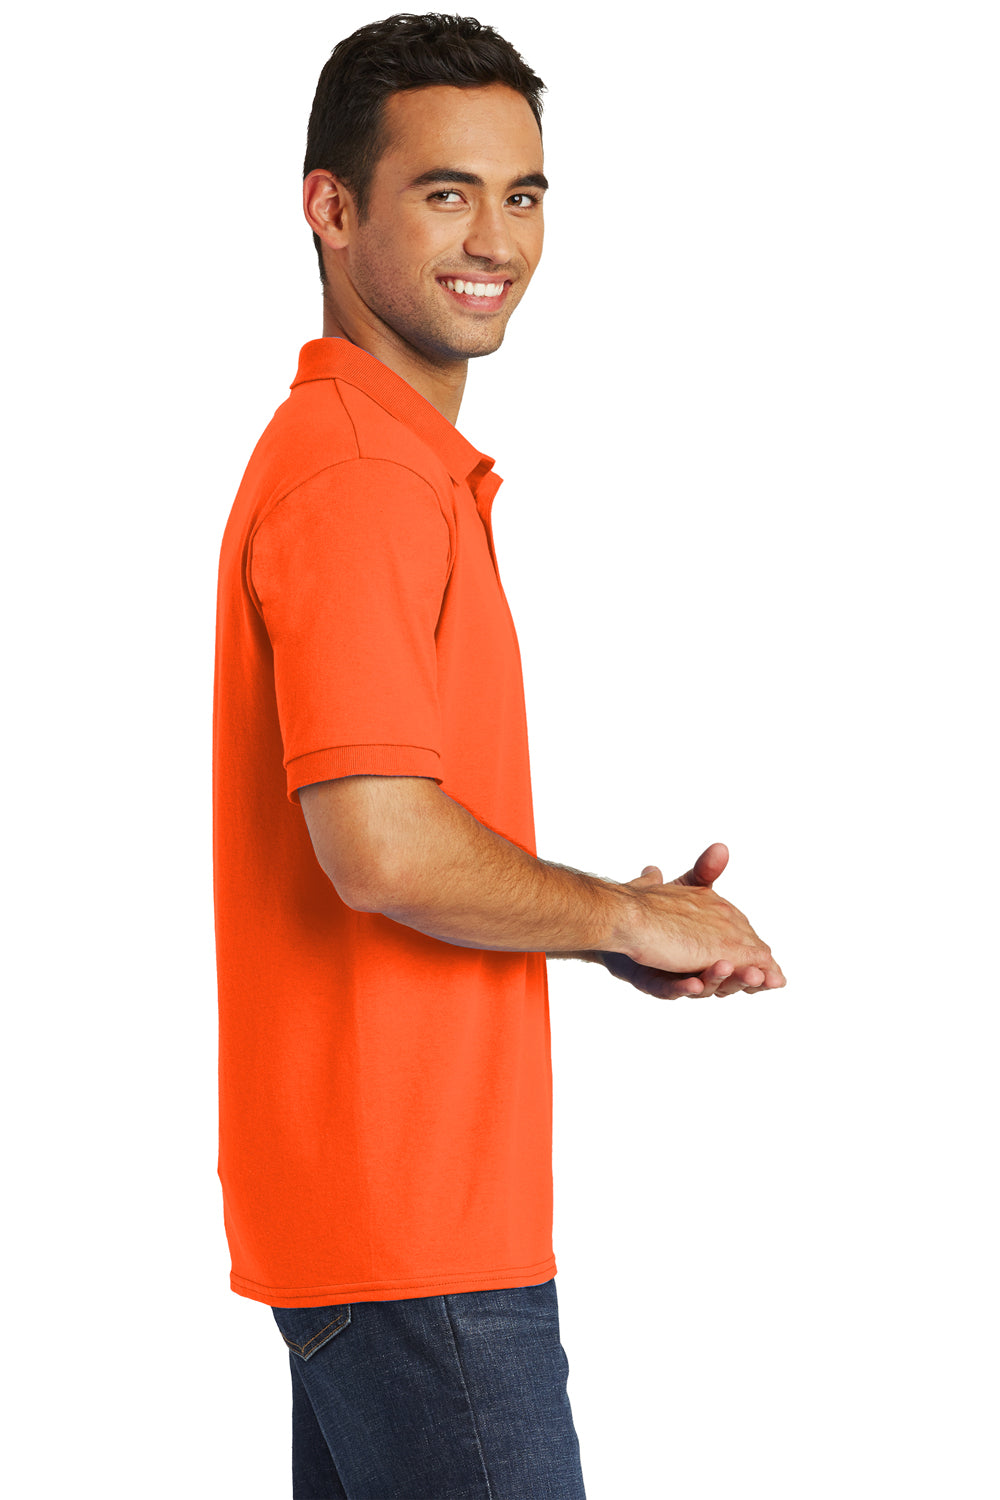 Port & Company KP55 Mens Core Stain Resistant Short Sleeve Polo Shirt Safety Orange Side